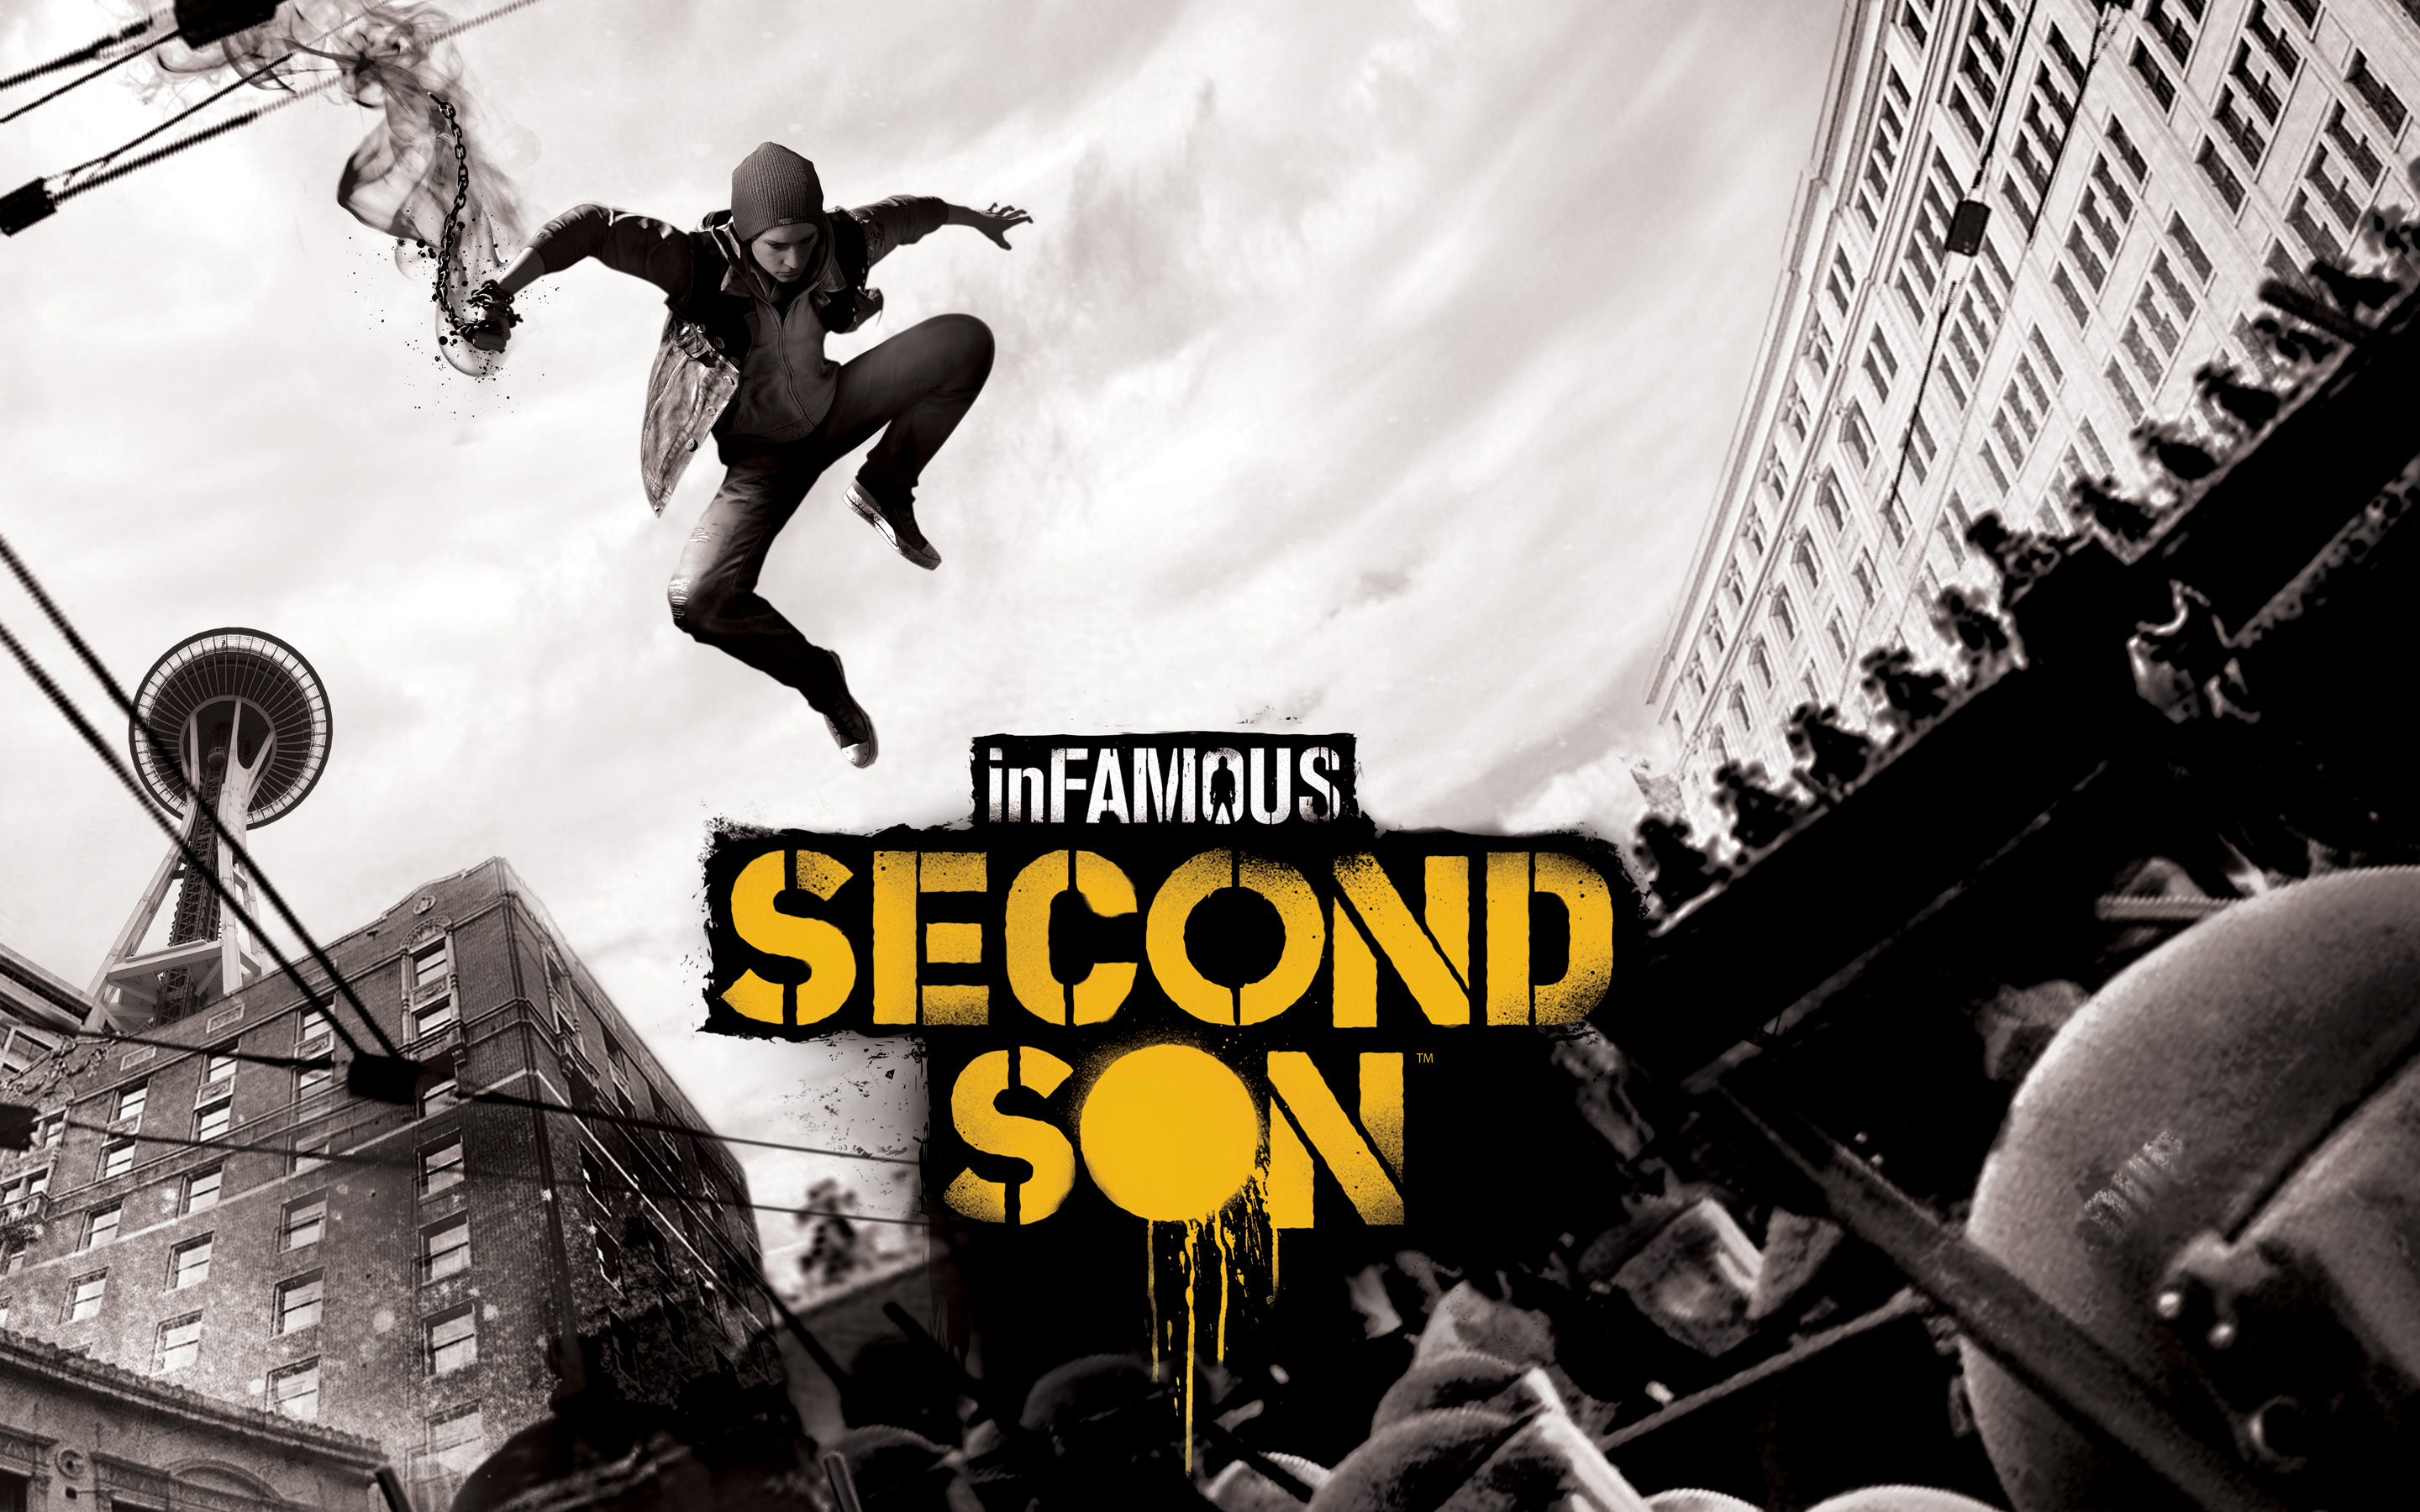 infamous 2 steam download